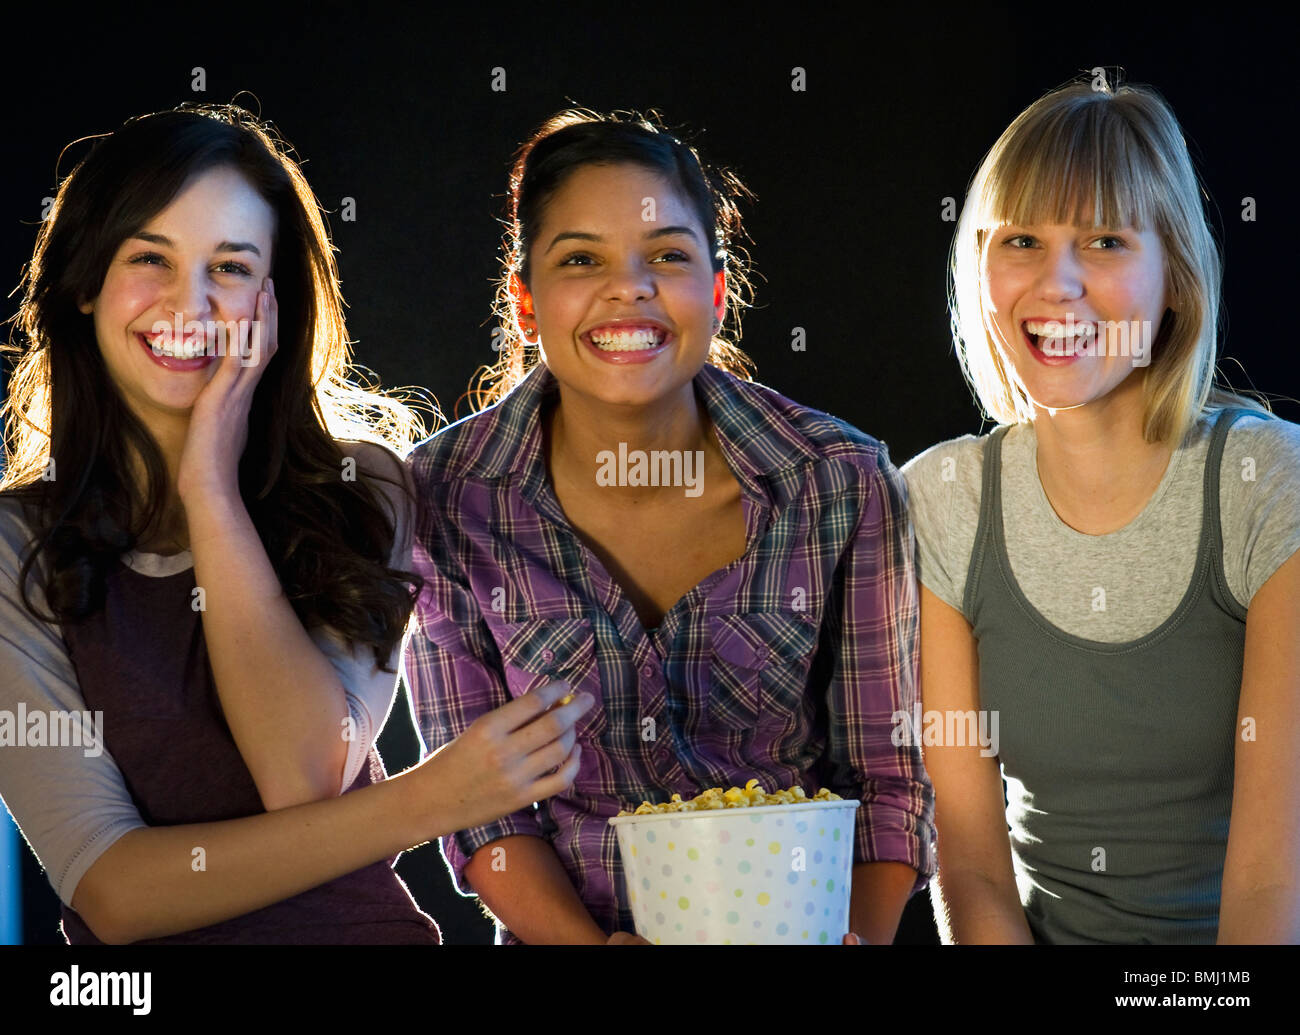 Young girls eating popcorn Stock Photo